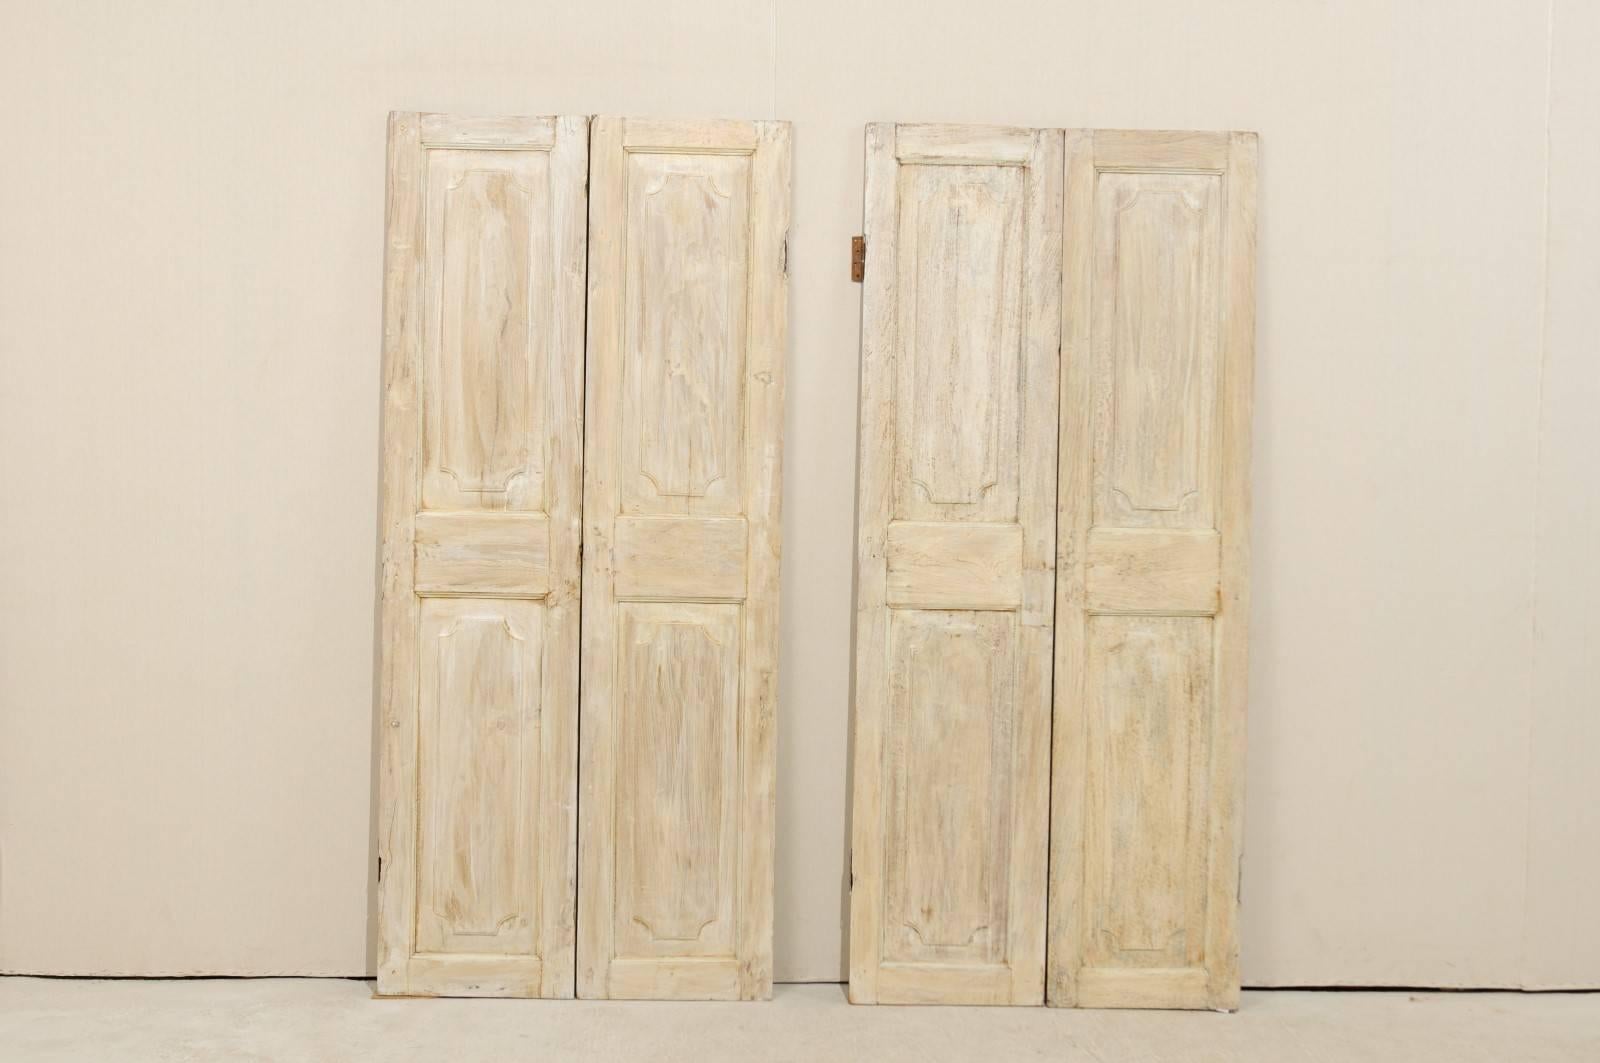 One Pair of Lovely French 19th Century Doors in Antiqued Beige and White Hues 2